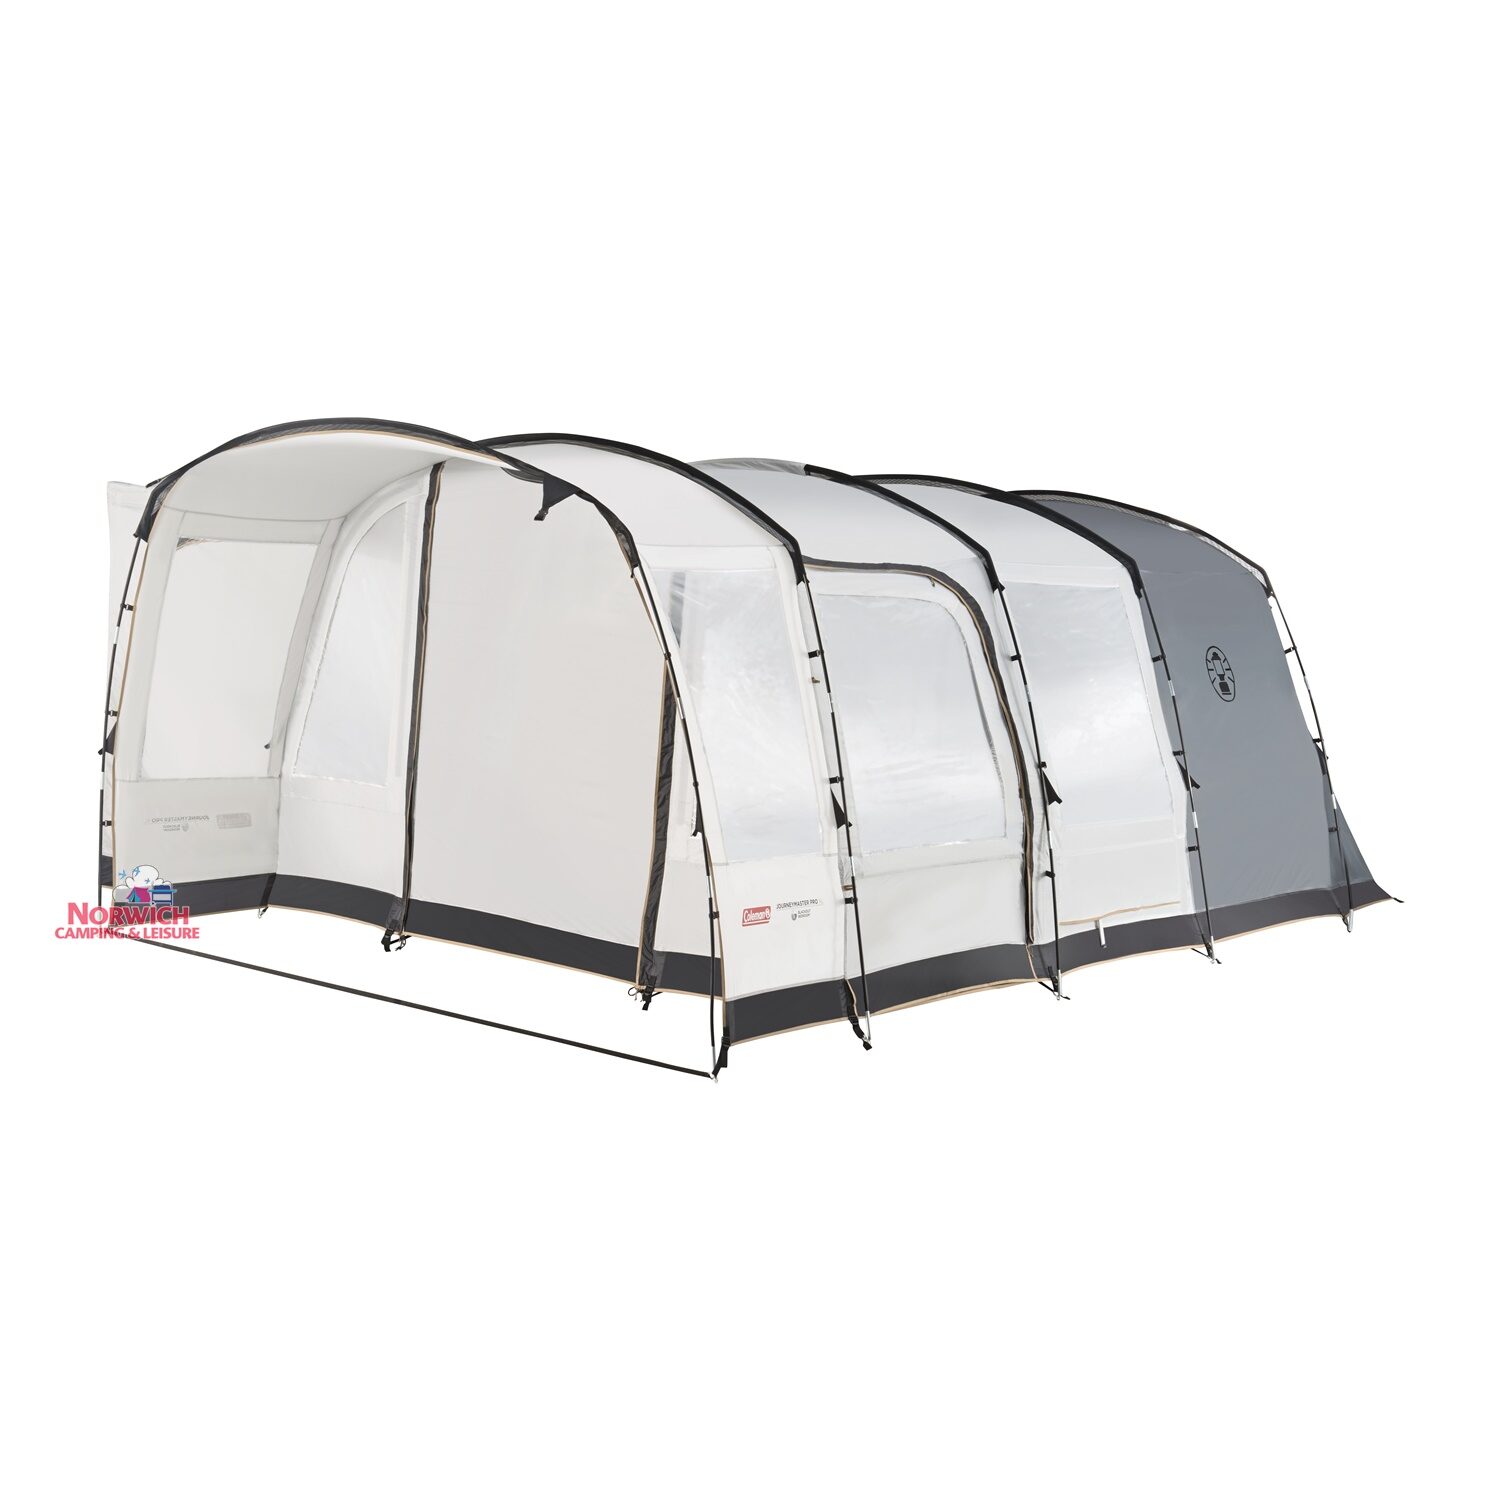 Coleman Journeymaster Pro Xl Driveaway Awning Norwich Camping 1